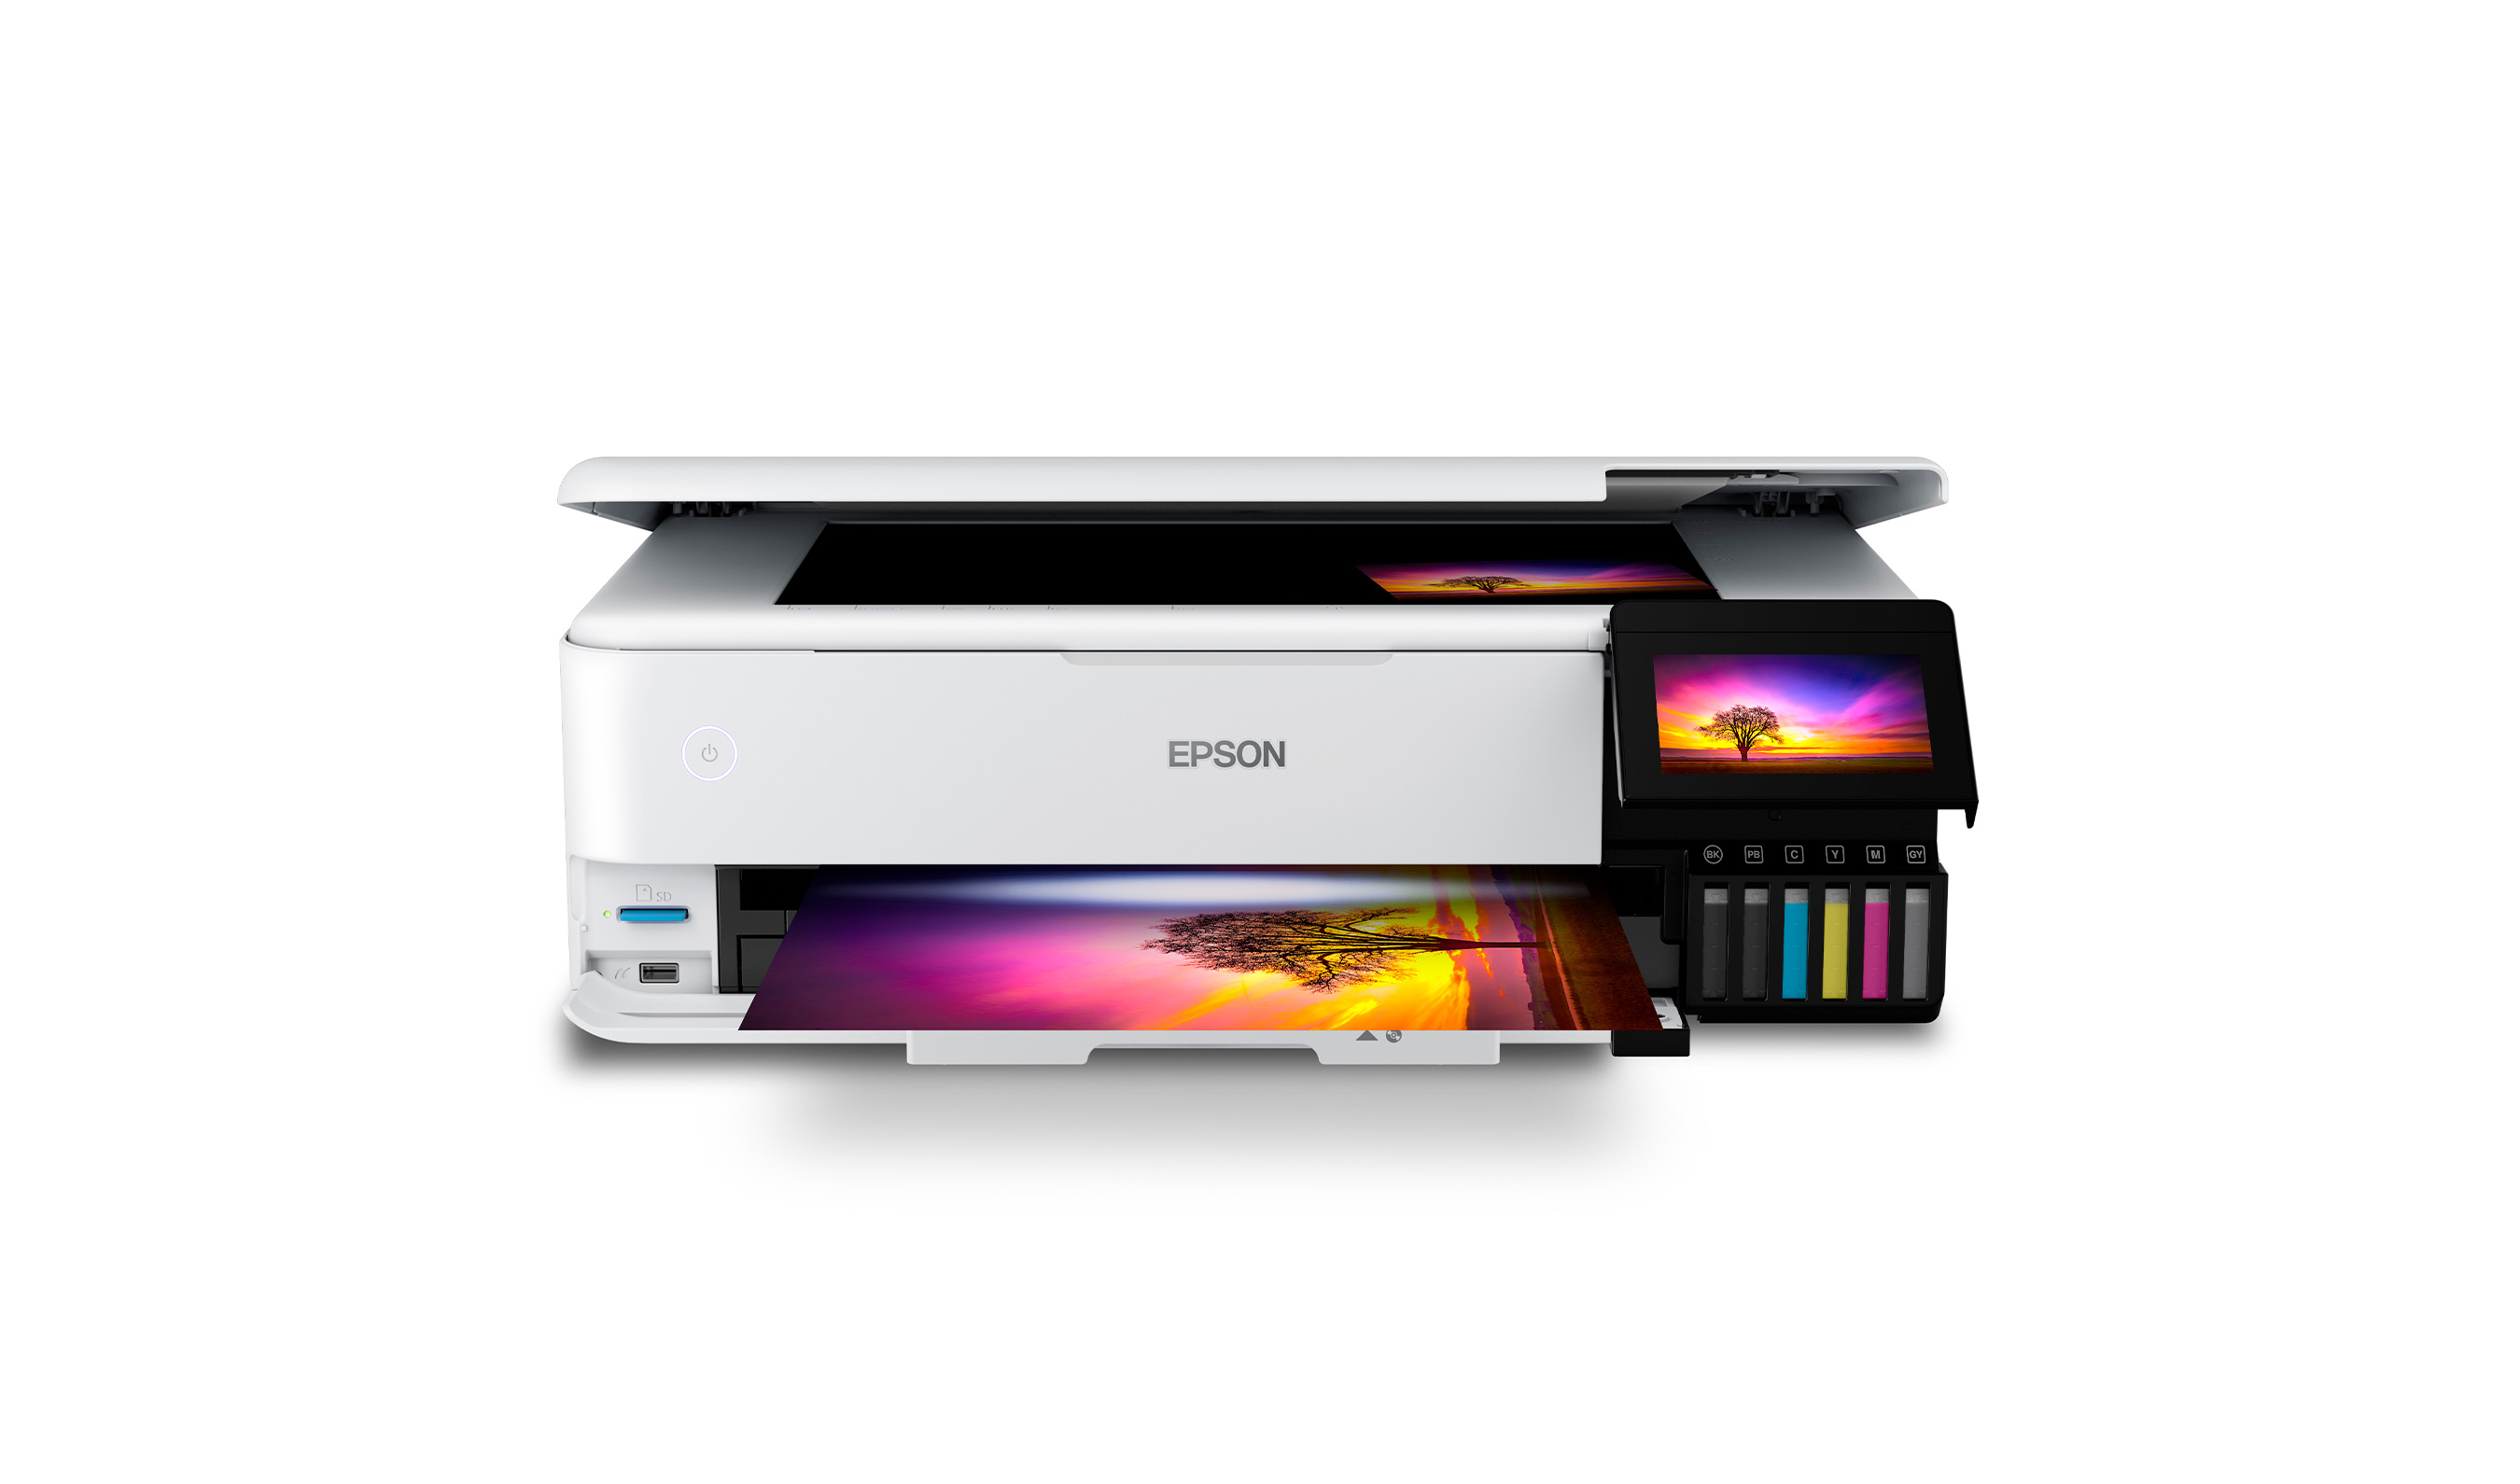 The EcoTank Photo ET-8550 offers lab-quality graphics for printing borderless 13" x 19" photos and more with affordable cartridge-free printing for creative professionals and at home hobbyists.